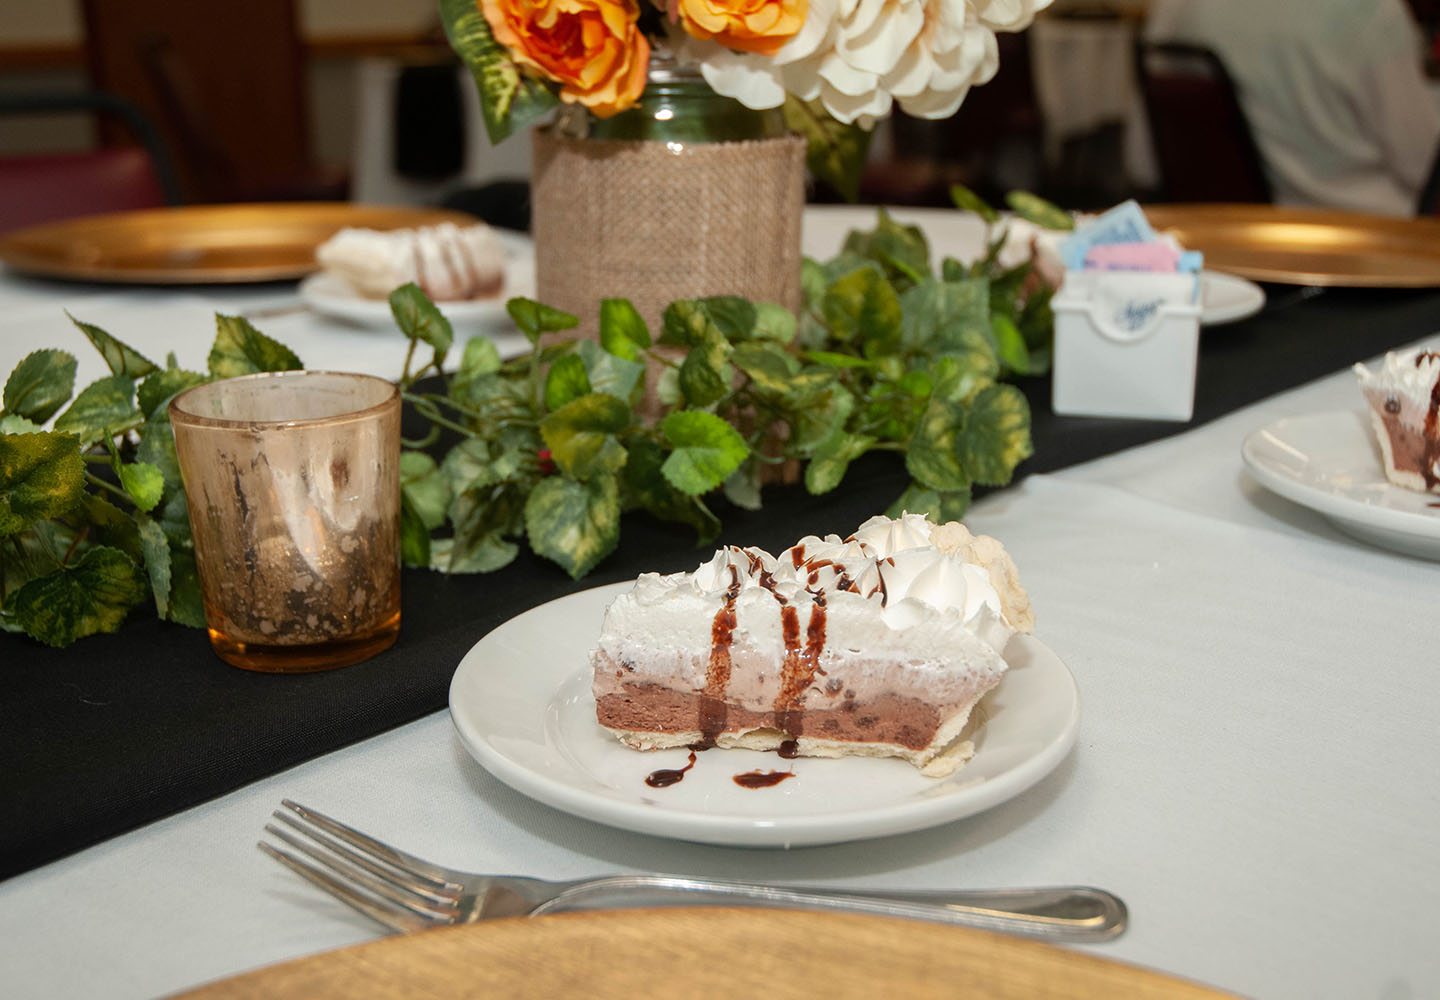 A slice of pie on the table of a catered luncheon for Homecoming at Blackburn College